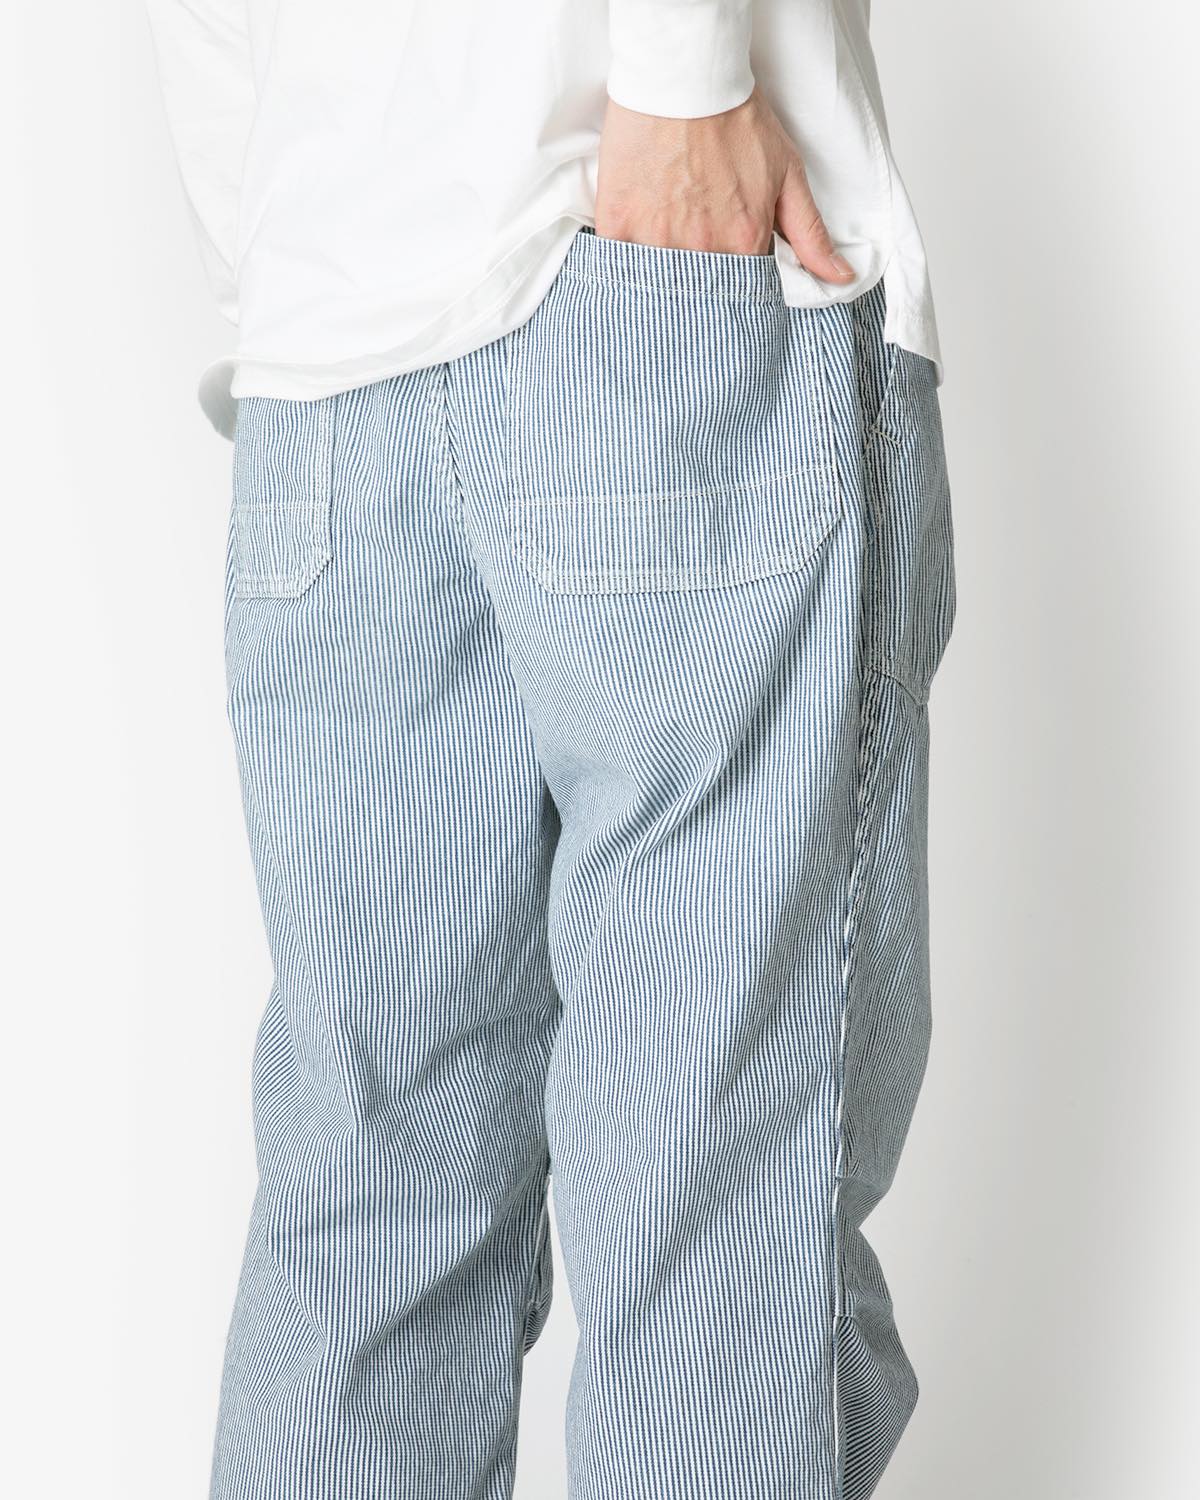 RANCHER TROUSERS COTTON 10oz HICKORY